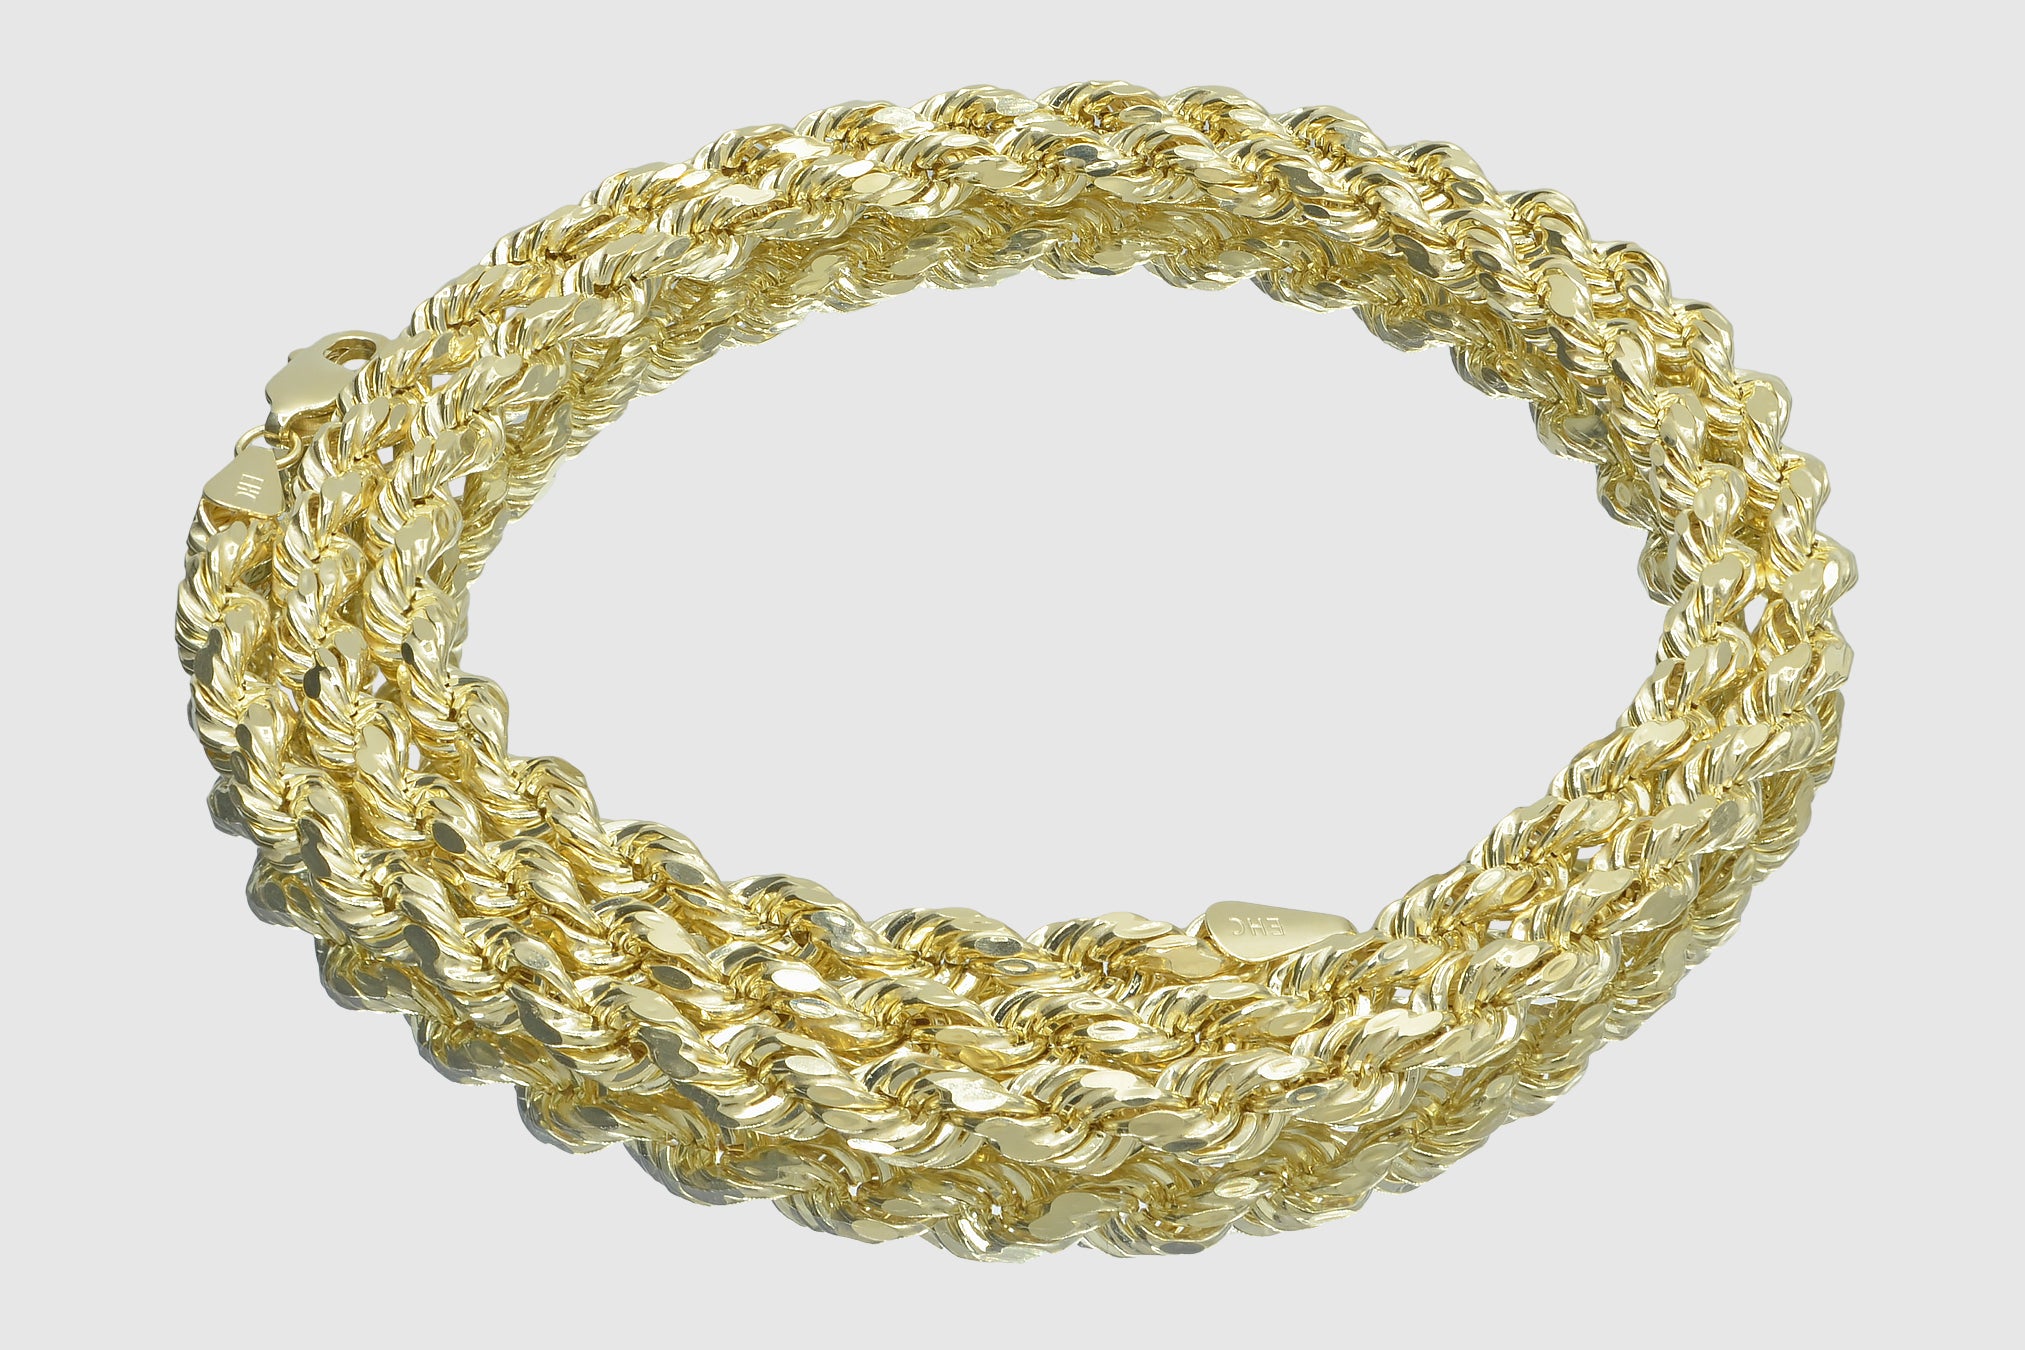 4mm - 7mm 14K Rope Diamond Cut Semi-Solid Yellow Gold Necklace | Uverly 5mm / 20